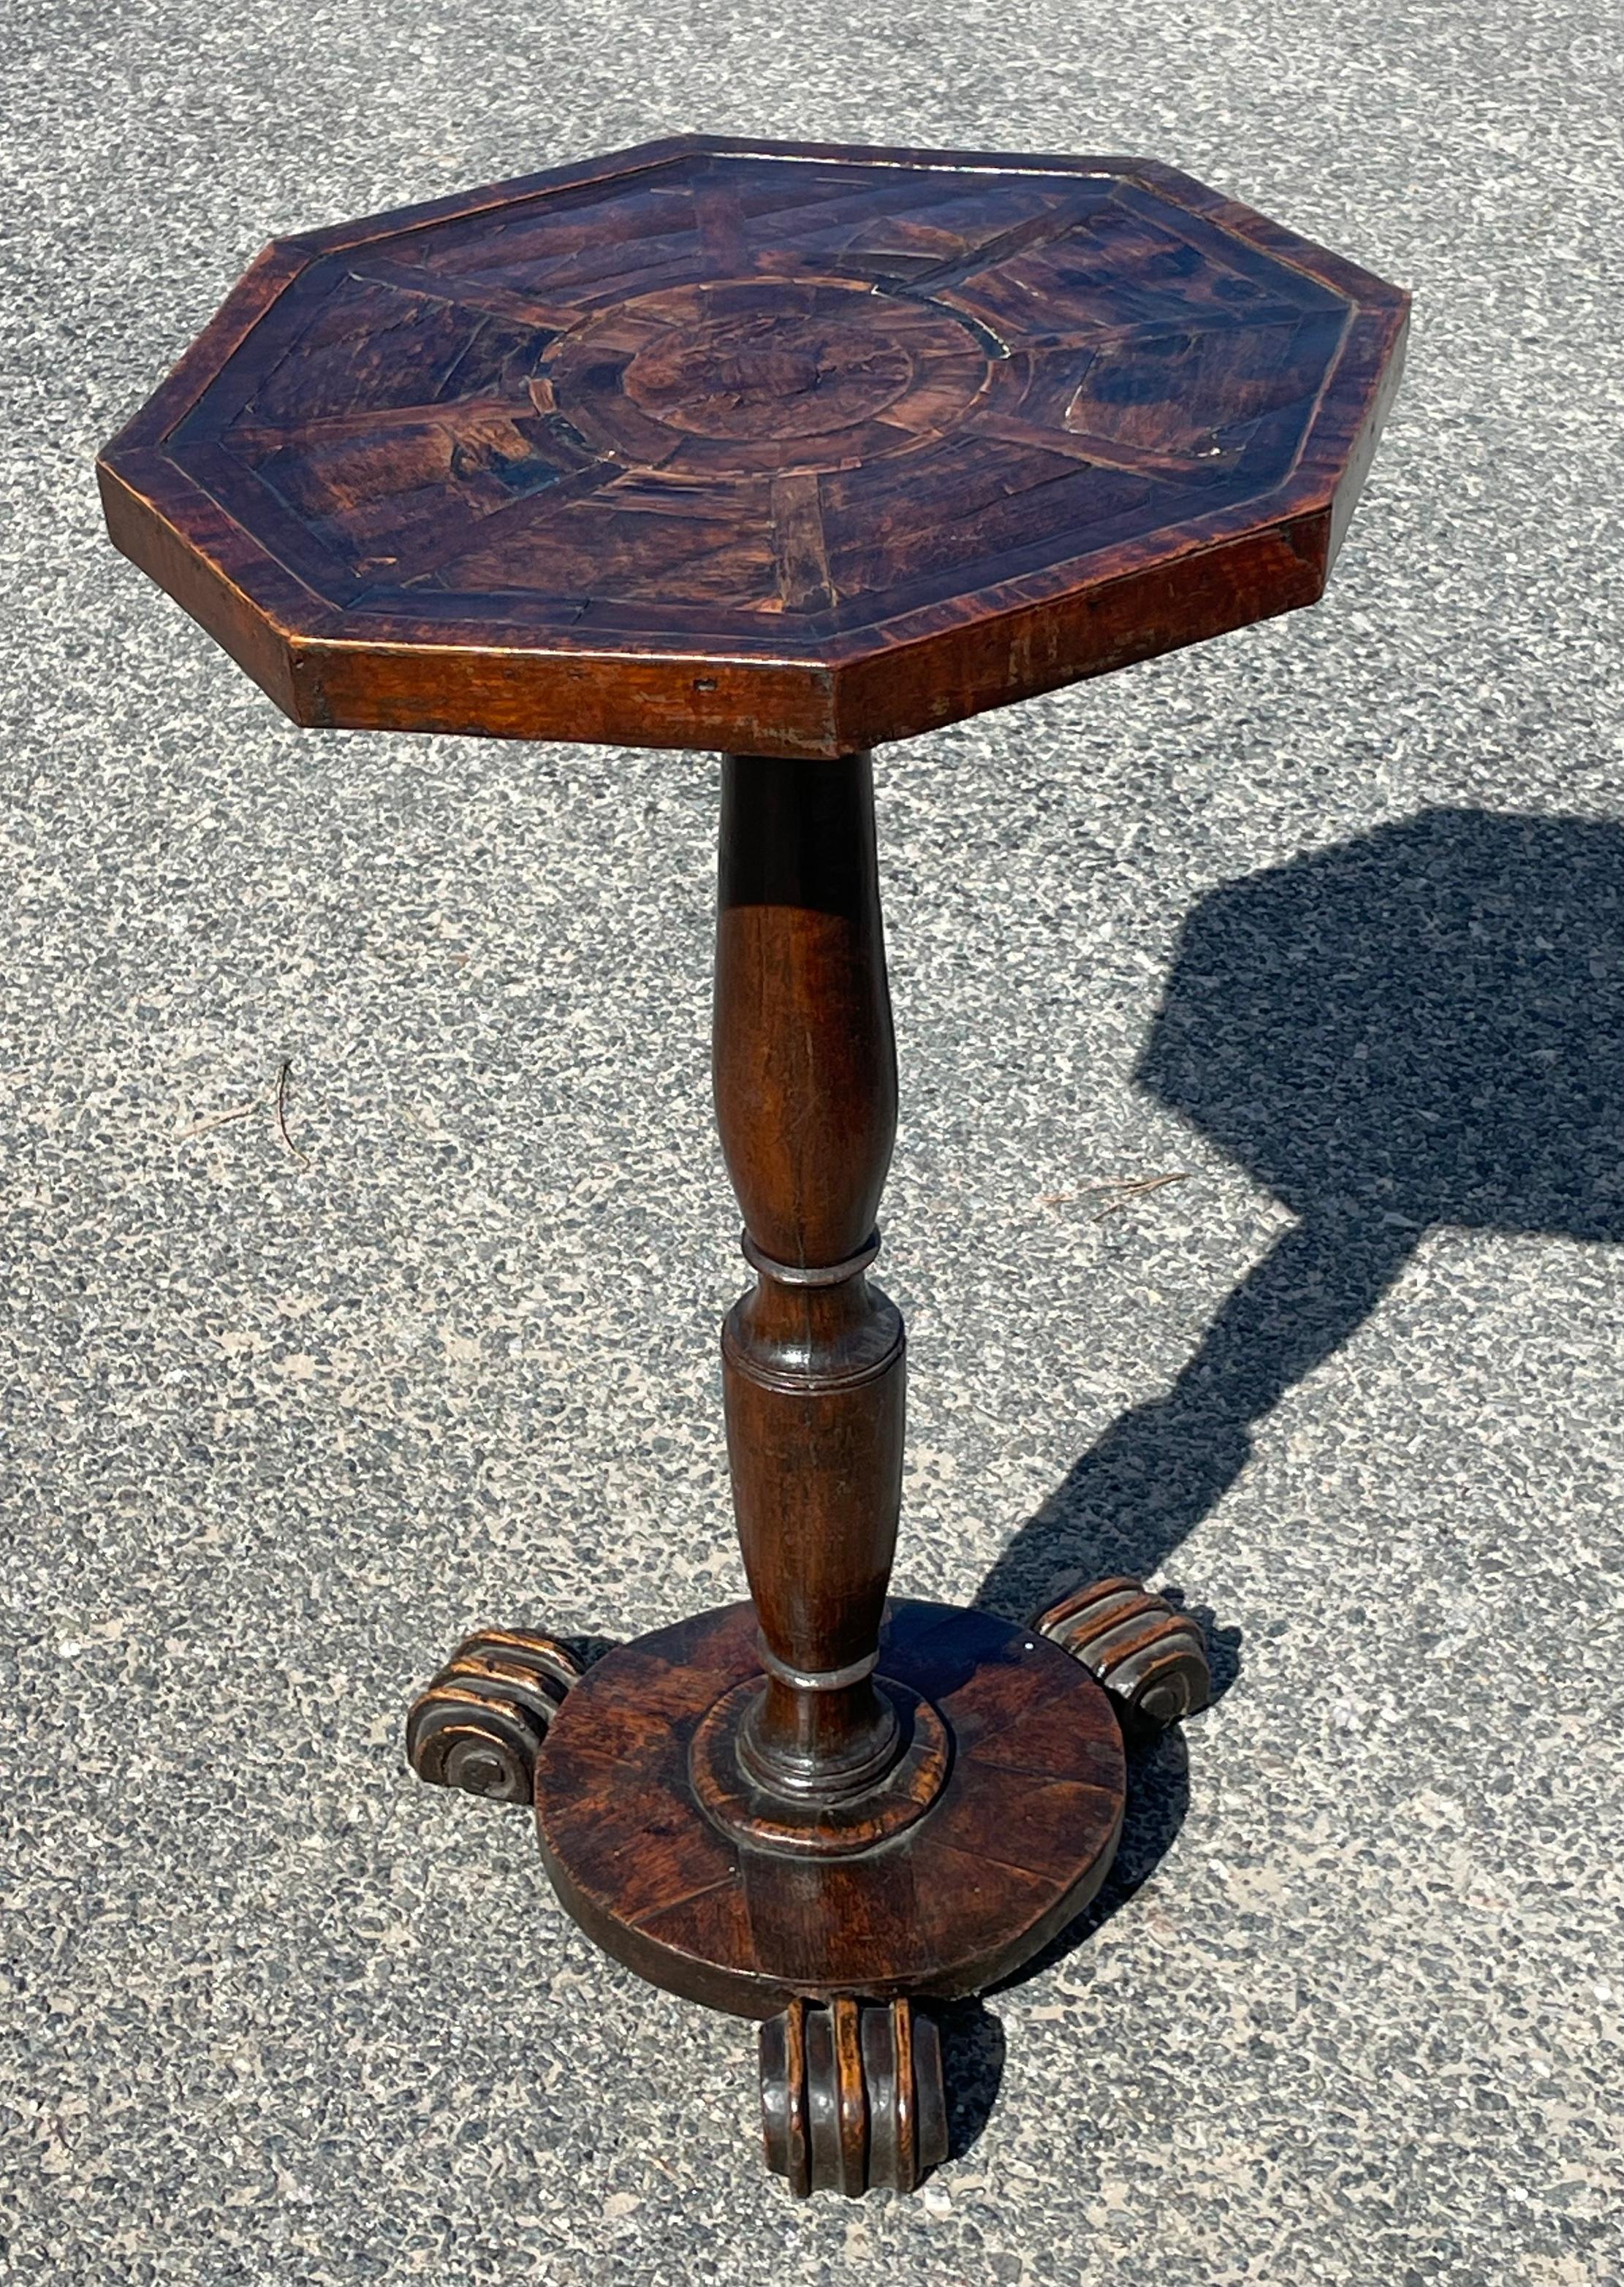 Diminutive 18th century English candle stand. Crafted from oak with inlaid octagonal top on turned pedestal and terminating in three claw feet.